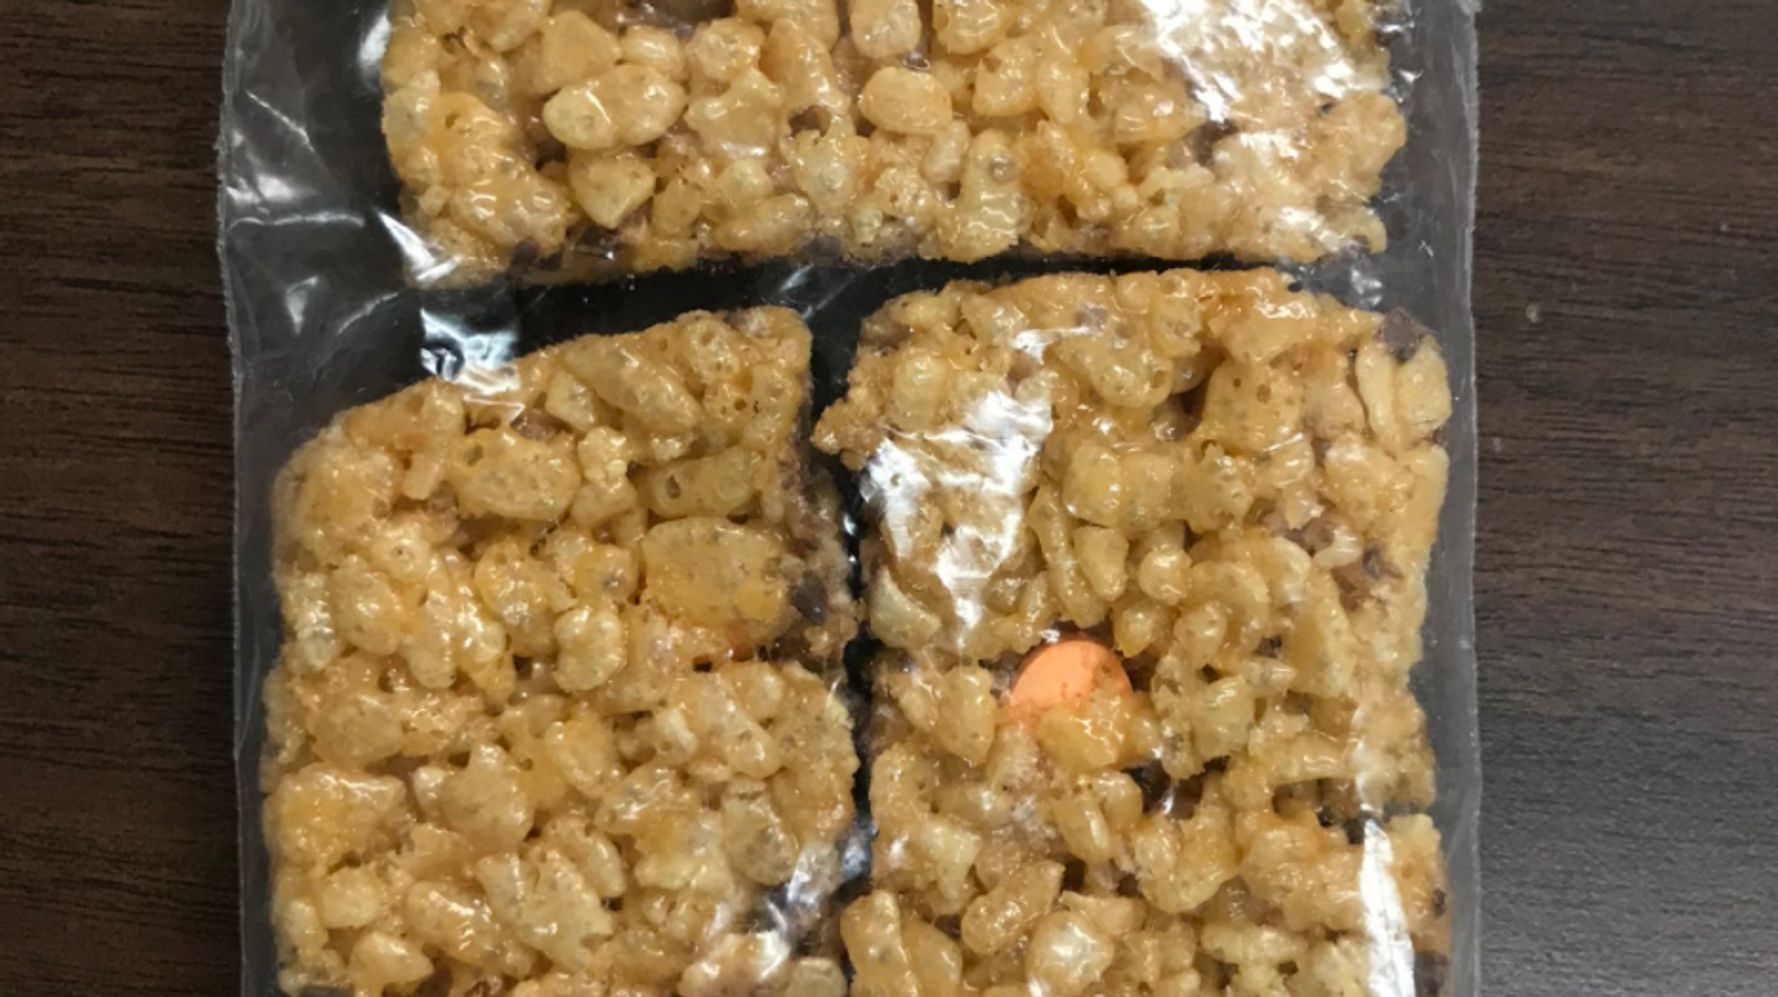 Prison Guard Accused Of Smuggling Drugs In Rice Krispies Treats